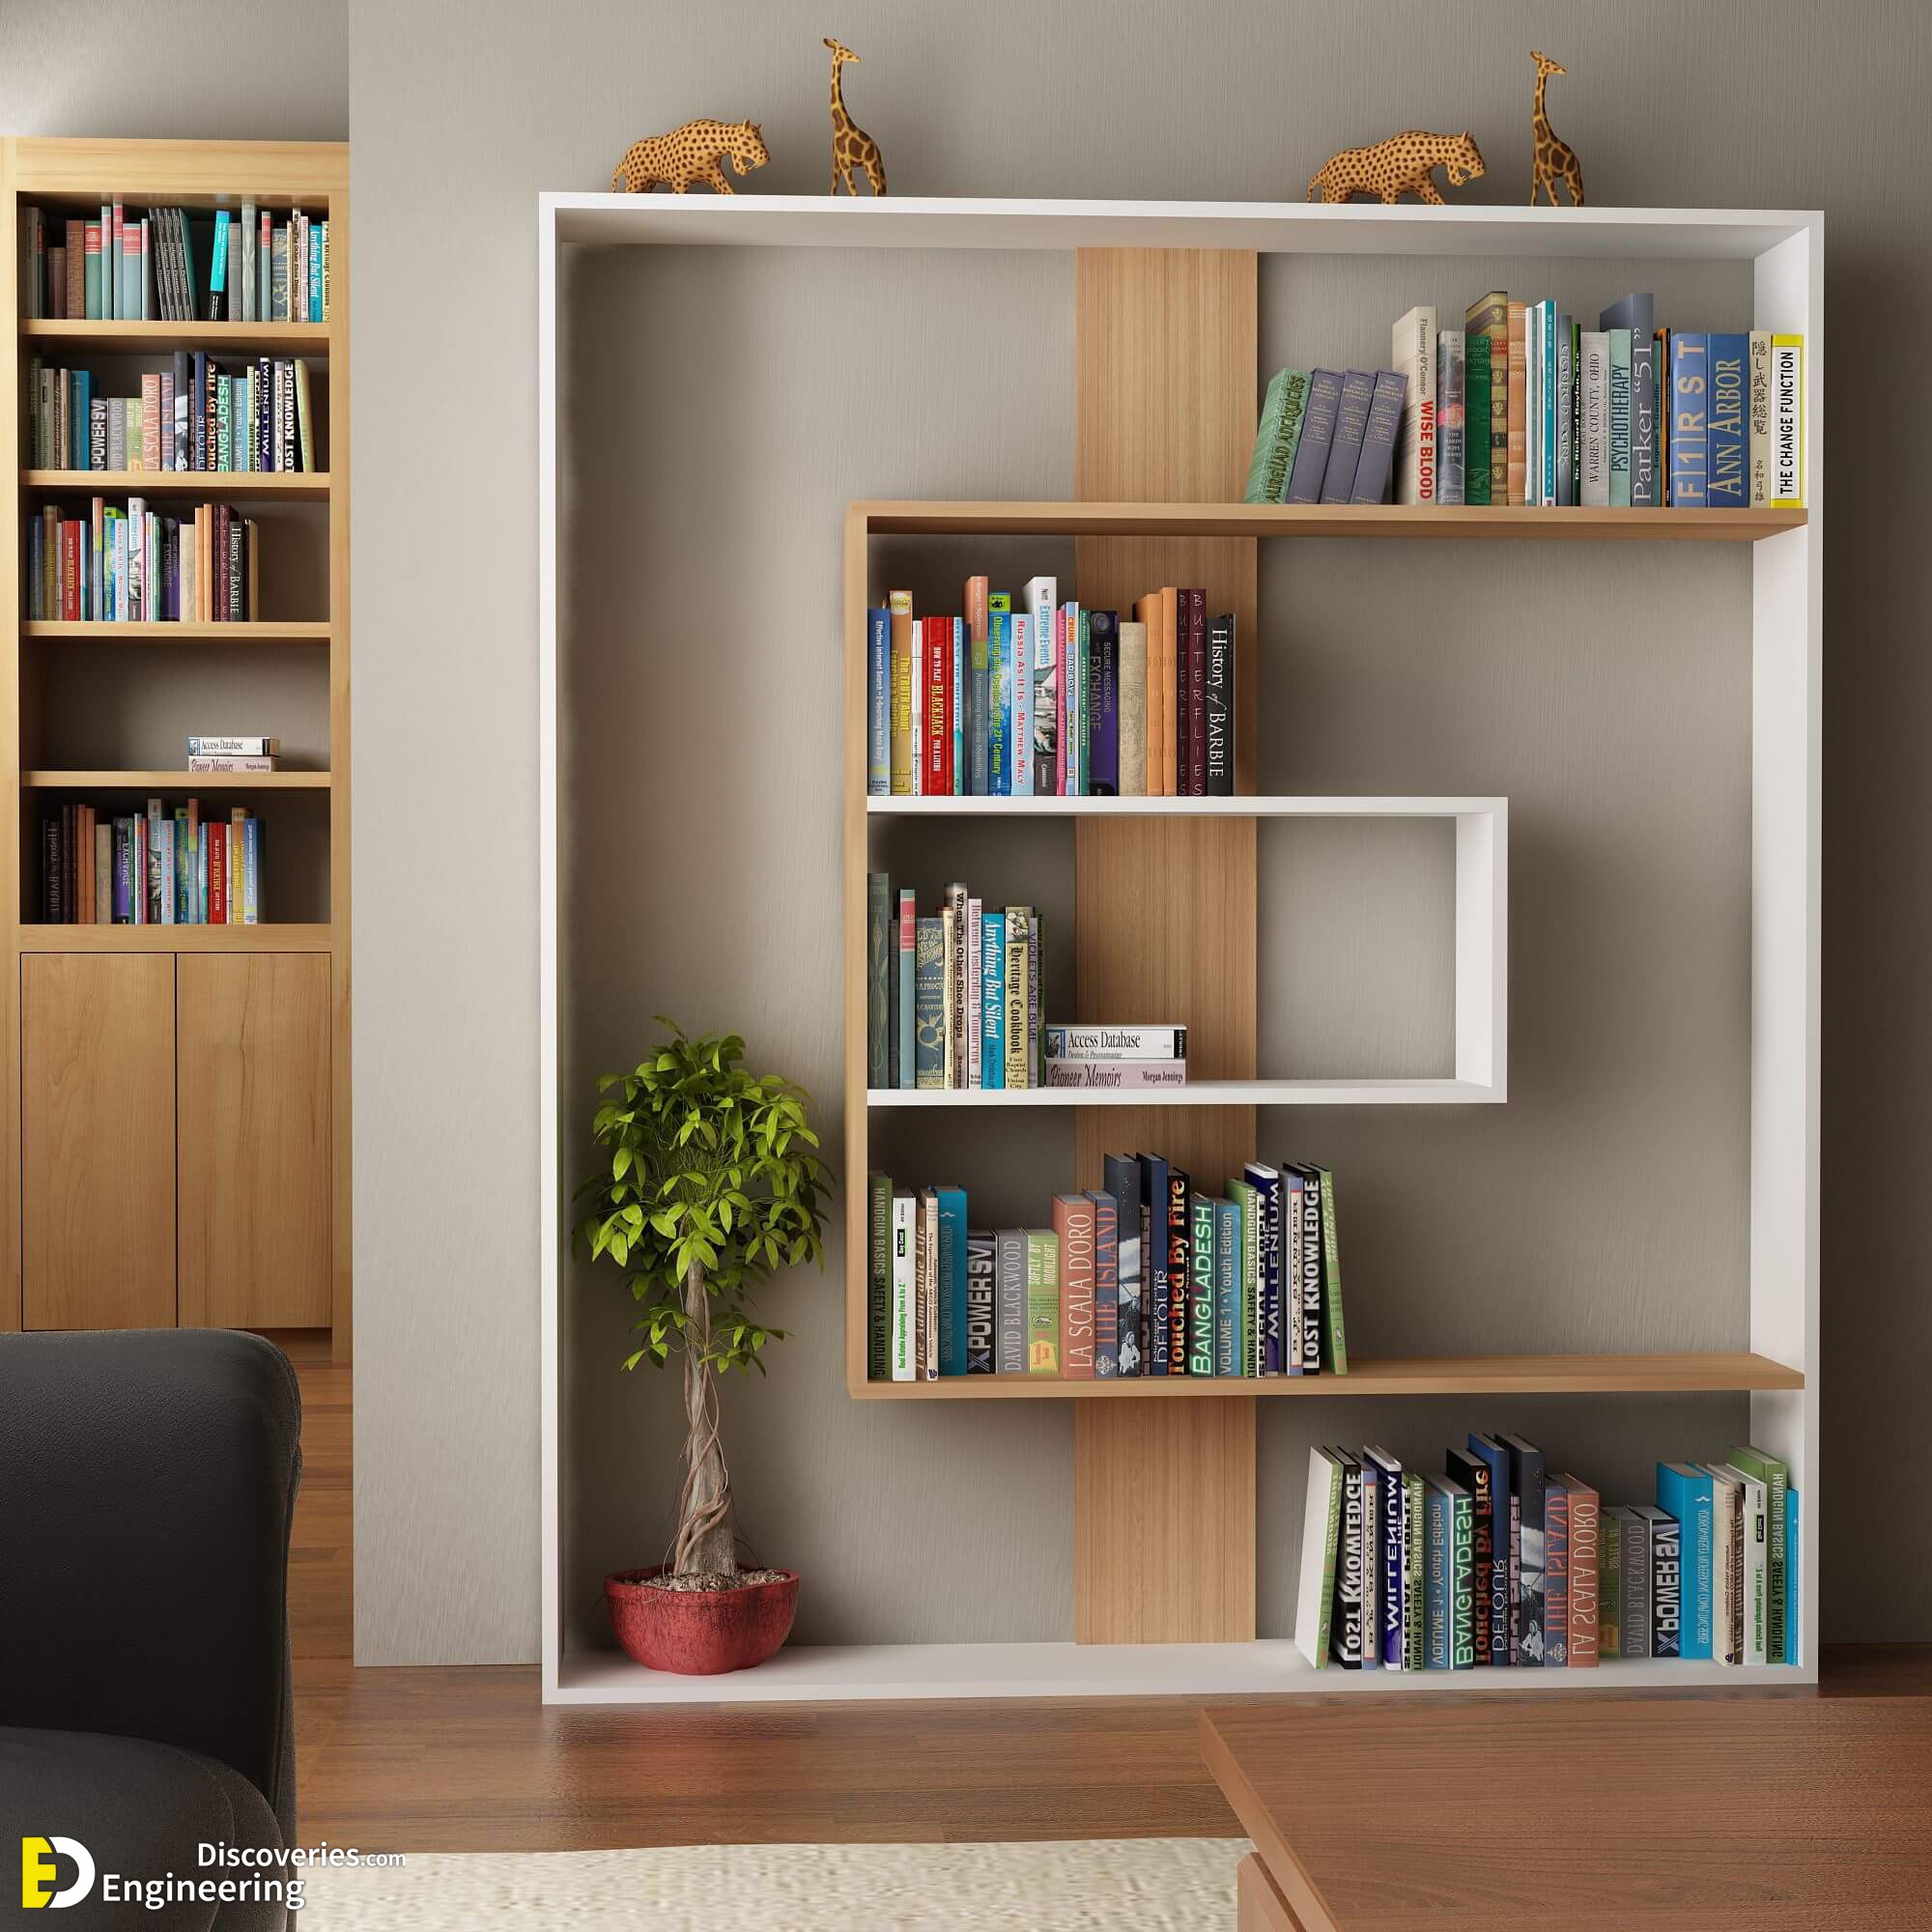 35 Home Library Ideas with Beautiful Bookshelf Designs